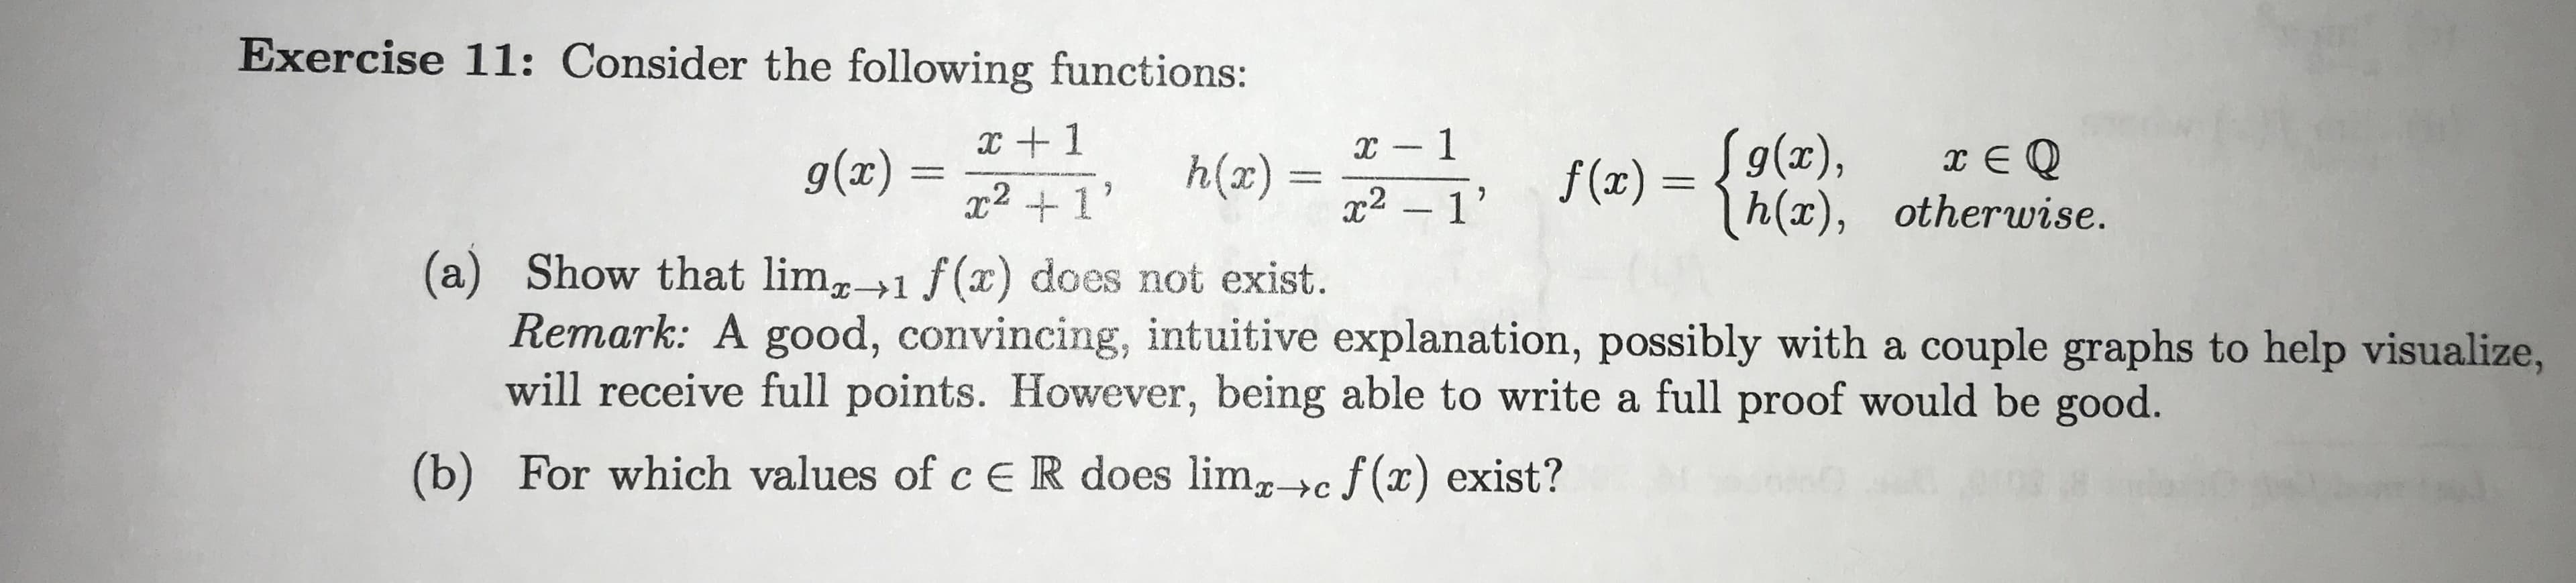 Exercise 11: Consider the following functions :
I +
h(x) =
x 1
T2 1
Sg(x),
r E Q
g(x)
f(x) =
r2 1'
h(x), otherwise.
(a) Show that lim1 f(x) does not exist.
Remark: A good, convincing, intuitive explanation, possibly with a couple graphs to help visualize,
will receive full points. However, being able to write a full proof would be good.
(b) For which values of c E R does limgc f(x) exist?
